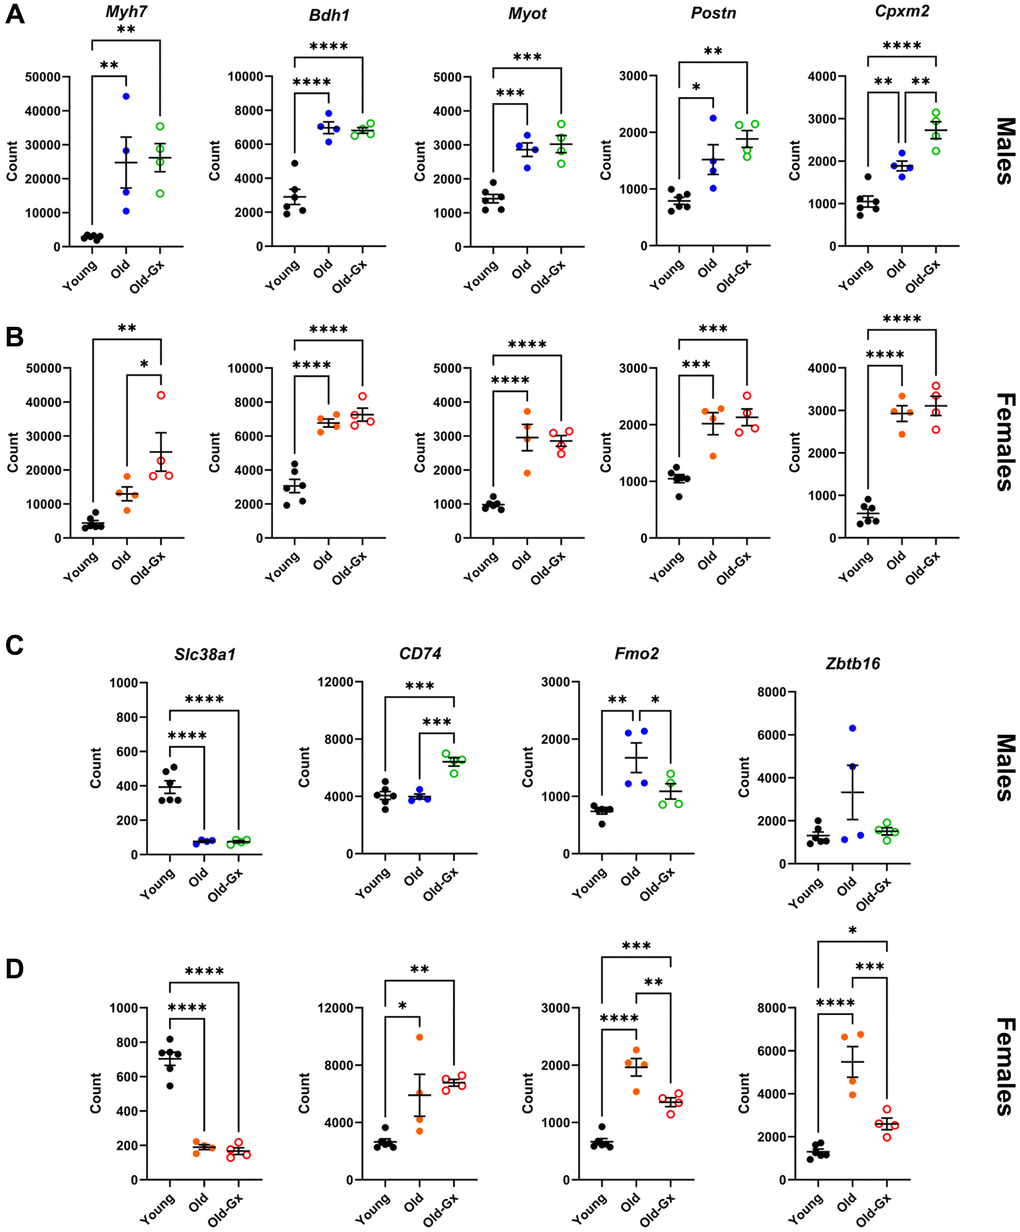 Gene expression of common LV genes up-regulated during cardiac aging in male (A) and female (B) mice. Myh7, Myosin heavy chain beta, Bdh1, 3-Hydroxybutyrate Dehydrogenase 1, Myot, Myotilin, Postn, Periostin, Cpxm2, Inactive Carboxypeptidase-Like Protein X2. (C) (males) and (D) (females). Downregulated genes and genes have different modulations with aging between Gx and non-Gx animals or between males and females. Slc38a1, Solute Carrier Family 38 Member 1, CD74, CD molecule, Fmo2, Flavin Containing Dimethylaniline Monooxygenase 2 and Zbtb16, Zinc Finger and BTB Domain Containing 16. Results are expressed as the mean ± SEM (n = 4). One-way ANOVA followed by Holm-Sidak post-test. *p **p ***p ****p 